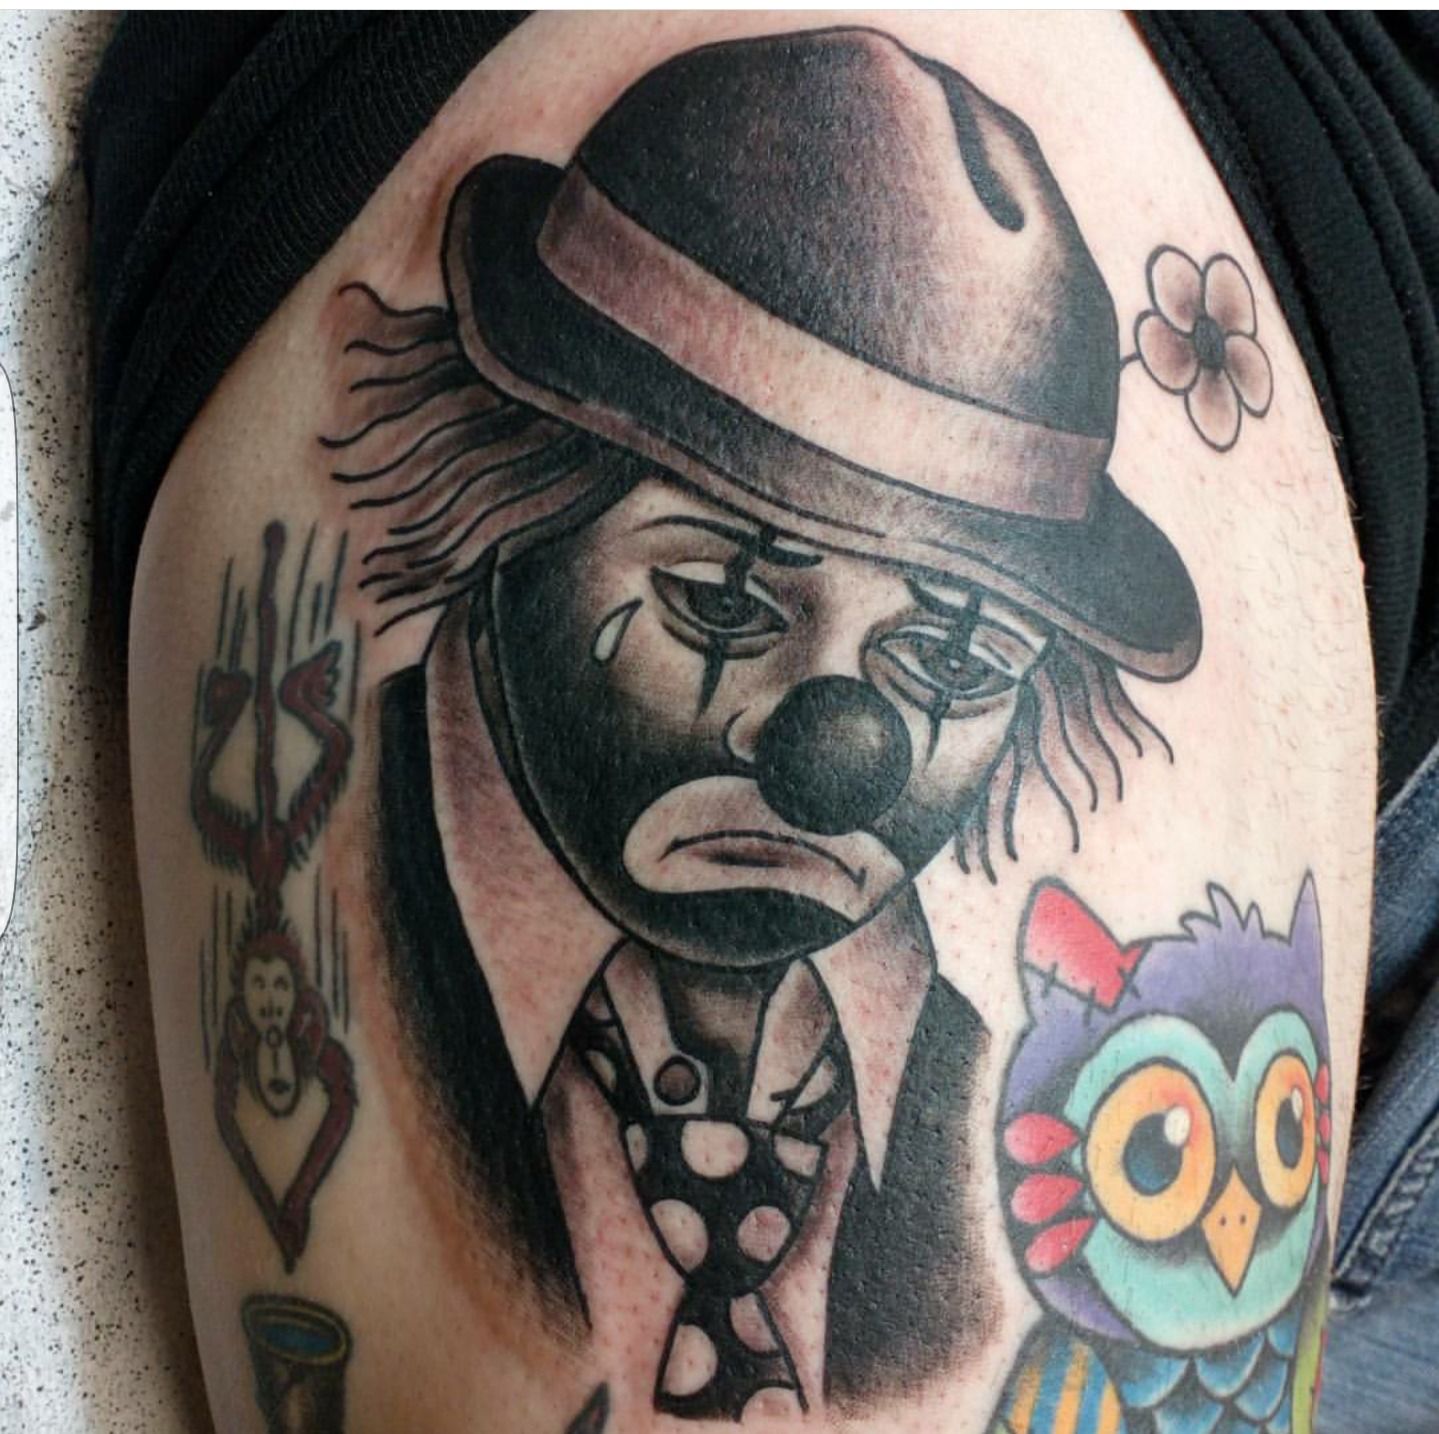 49 Exclusive Clown Tattoo Designs You Must See to Believe  Psycho Tats